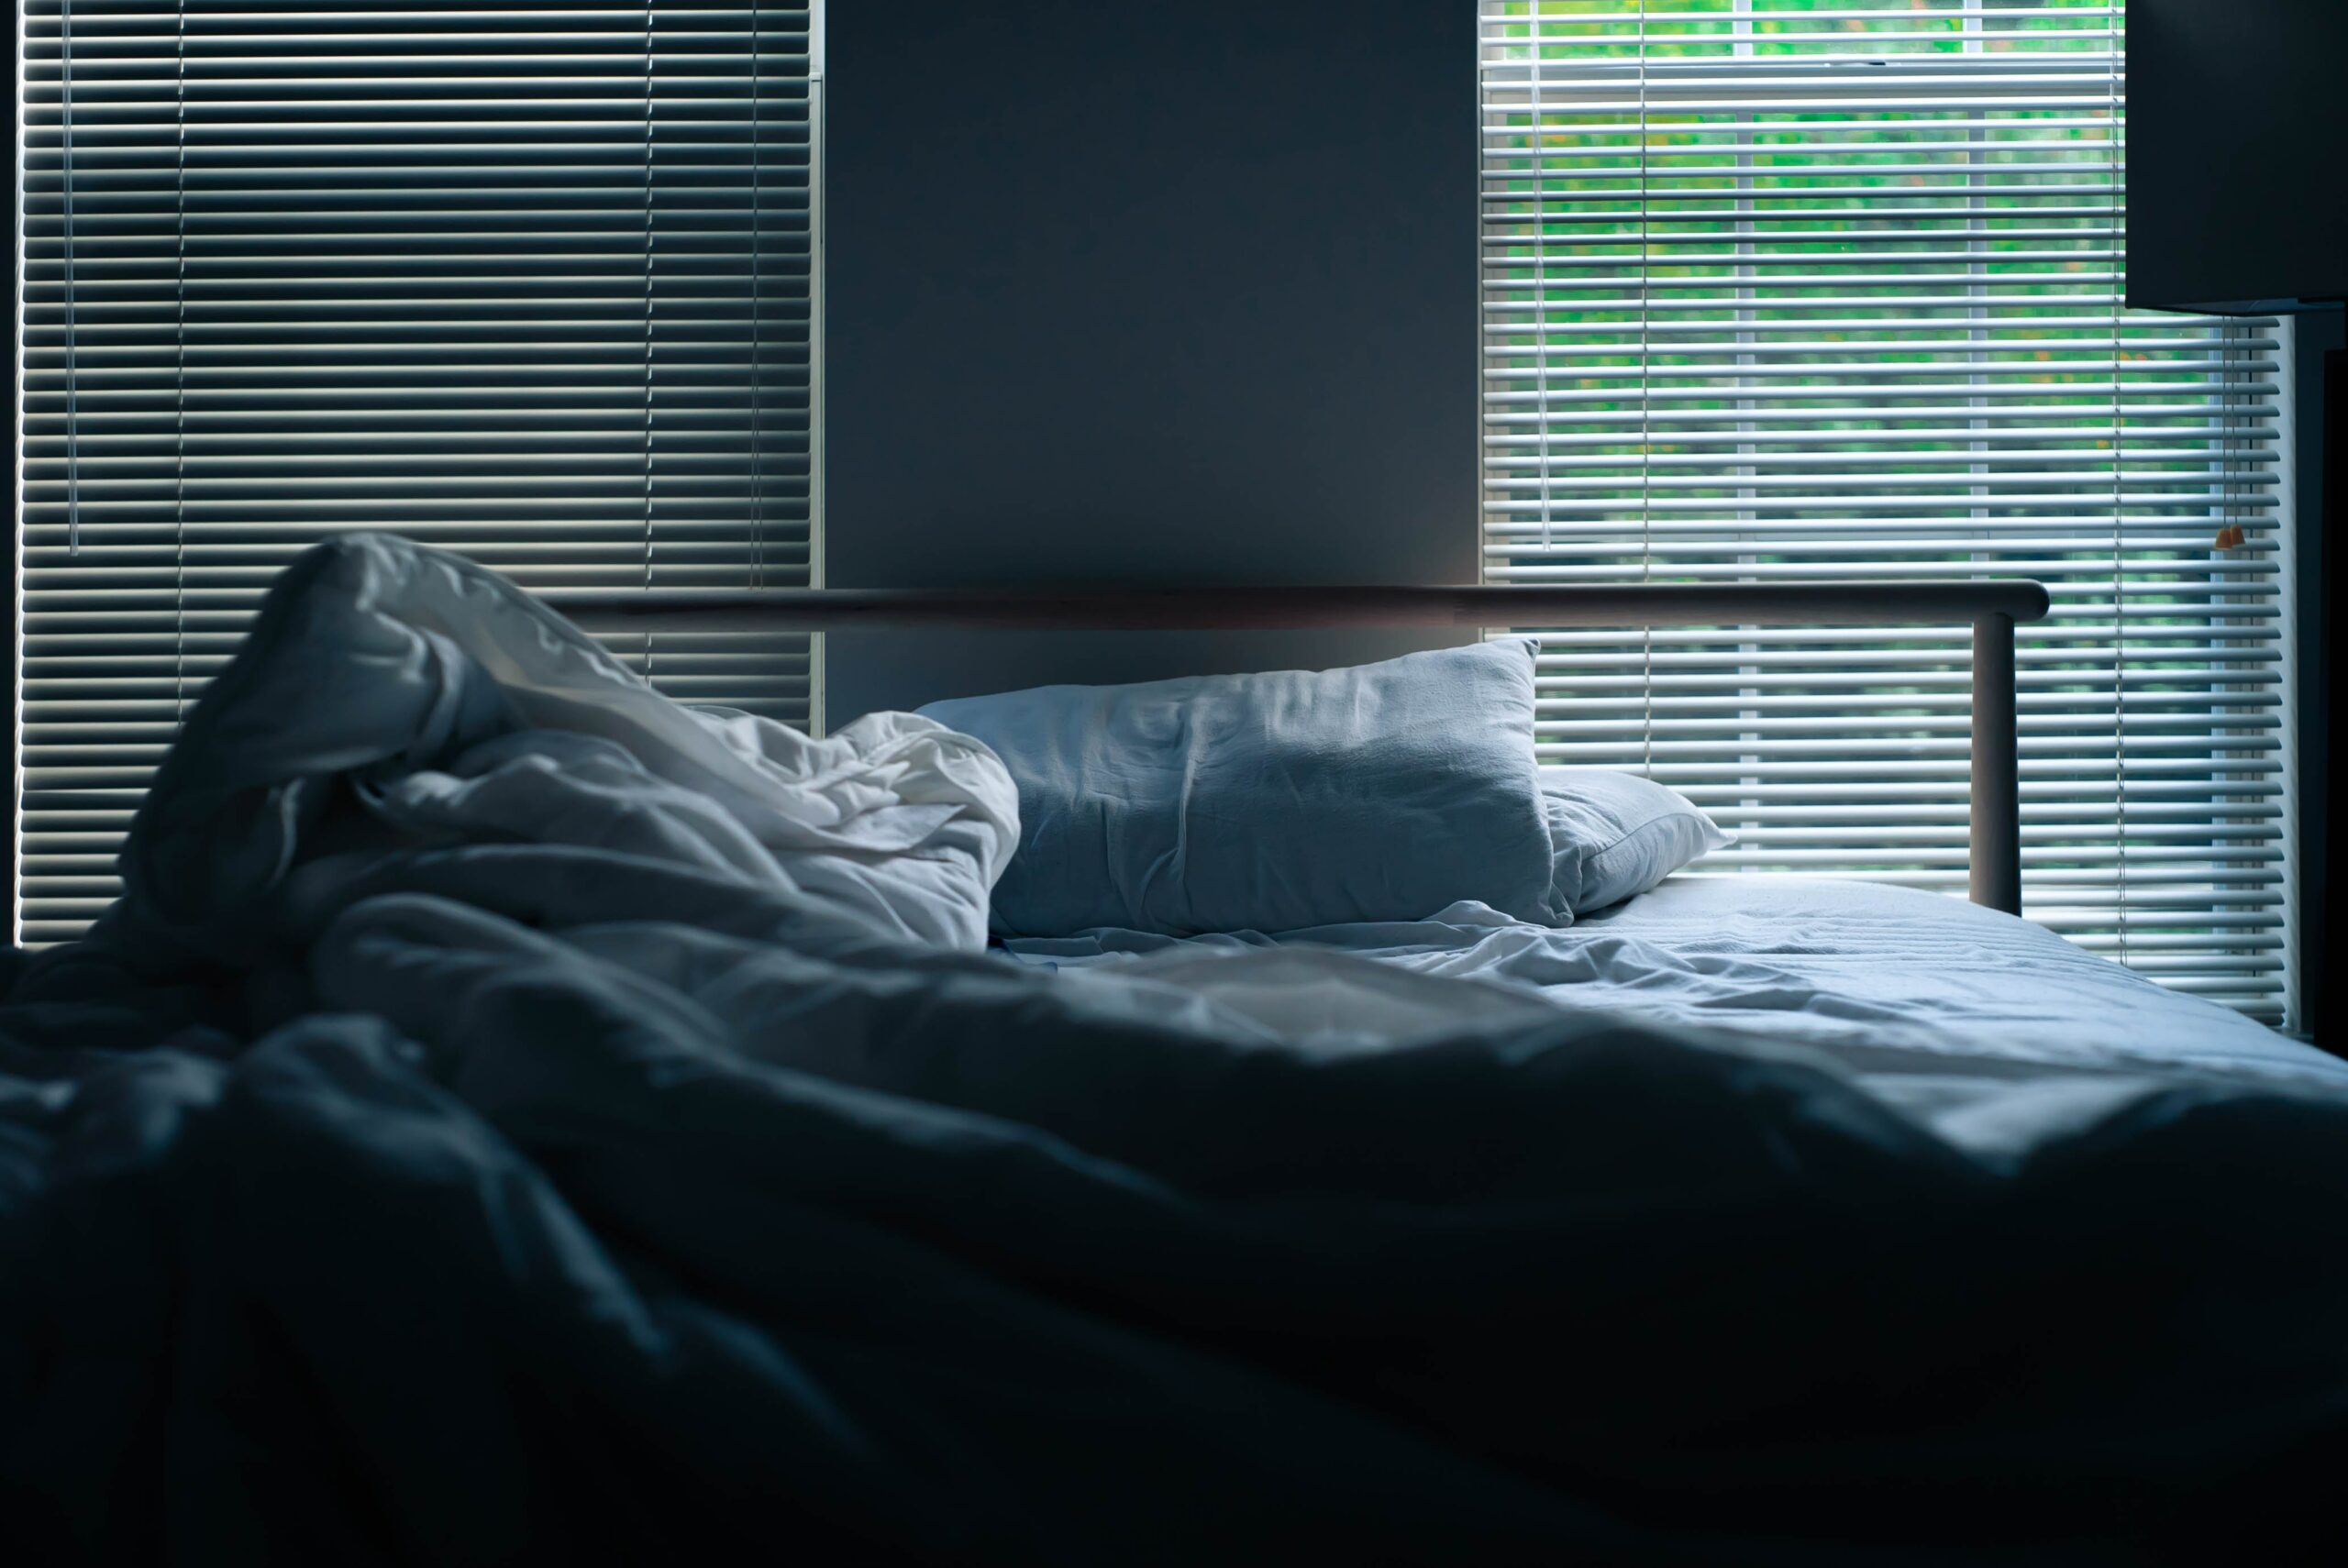 Can The CES Ultra Device Fix Insomnia?